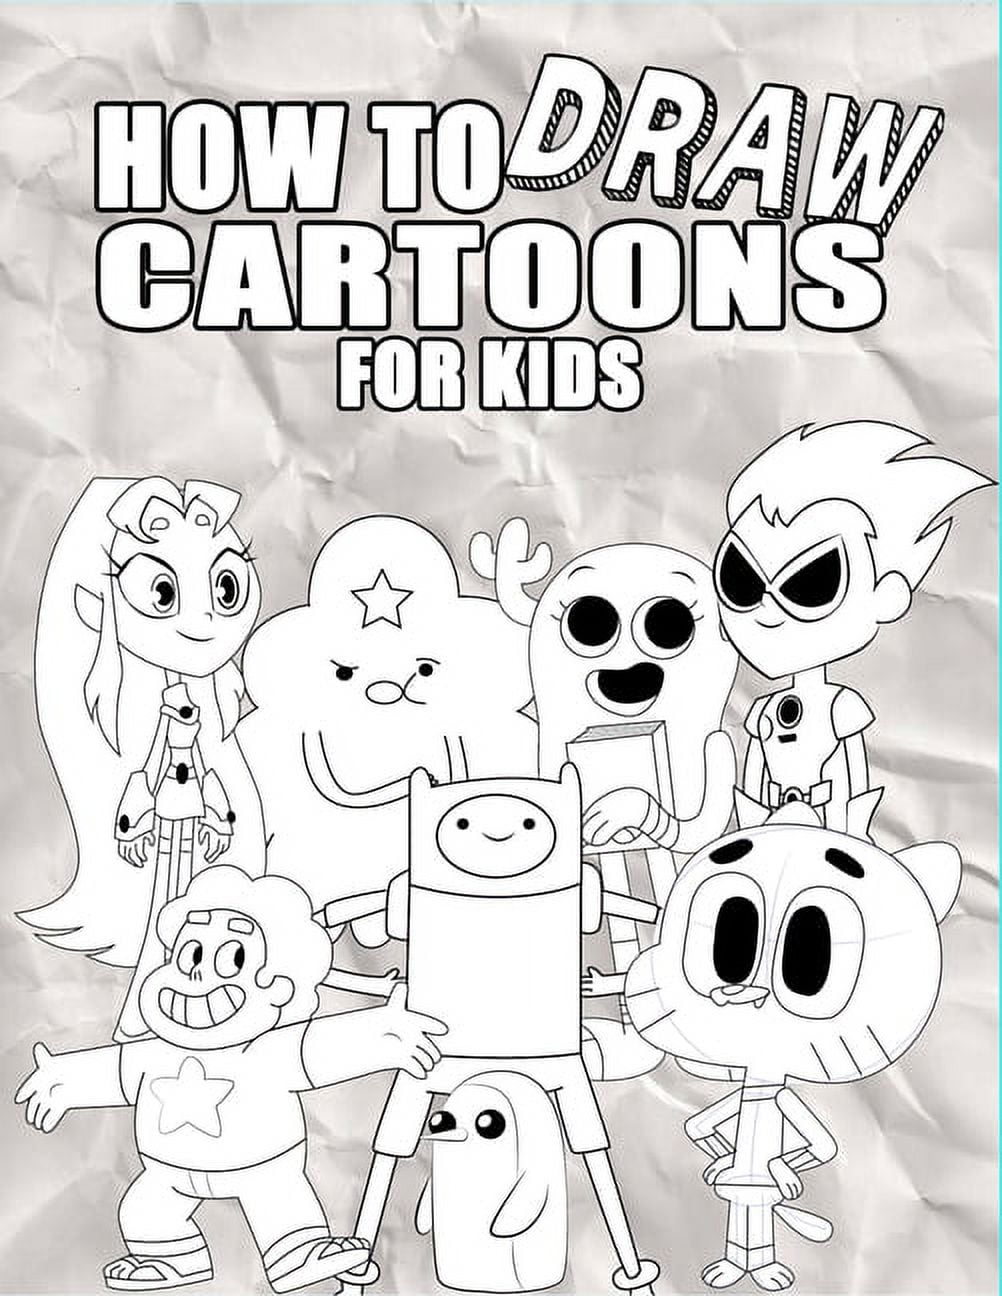 Learn How To Draw Cartoons For Kids - Toons Mag